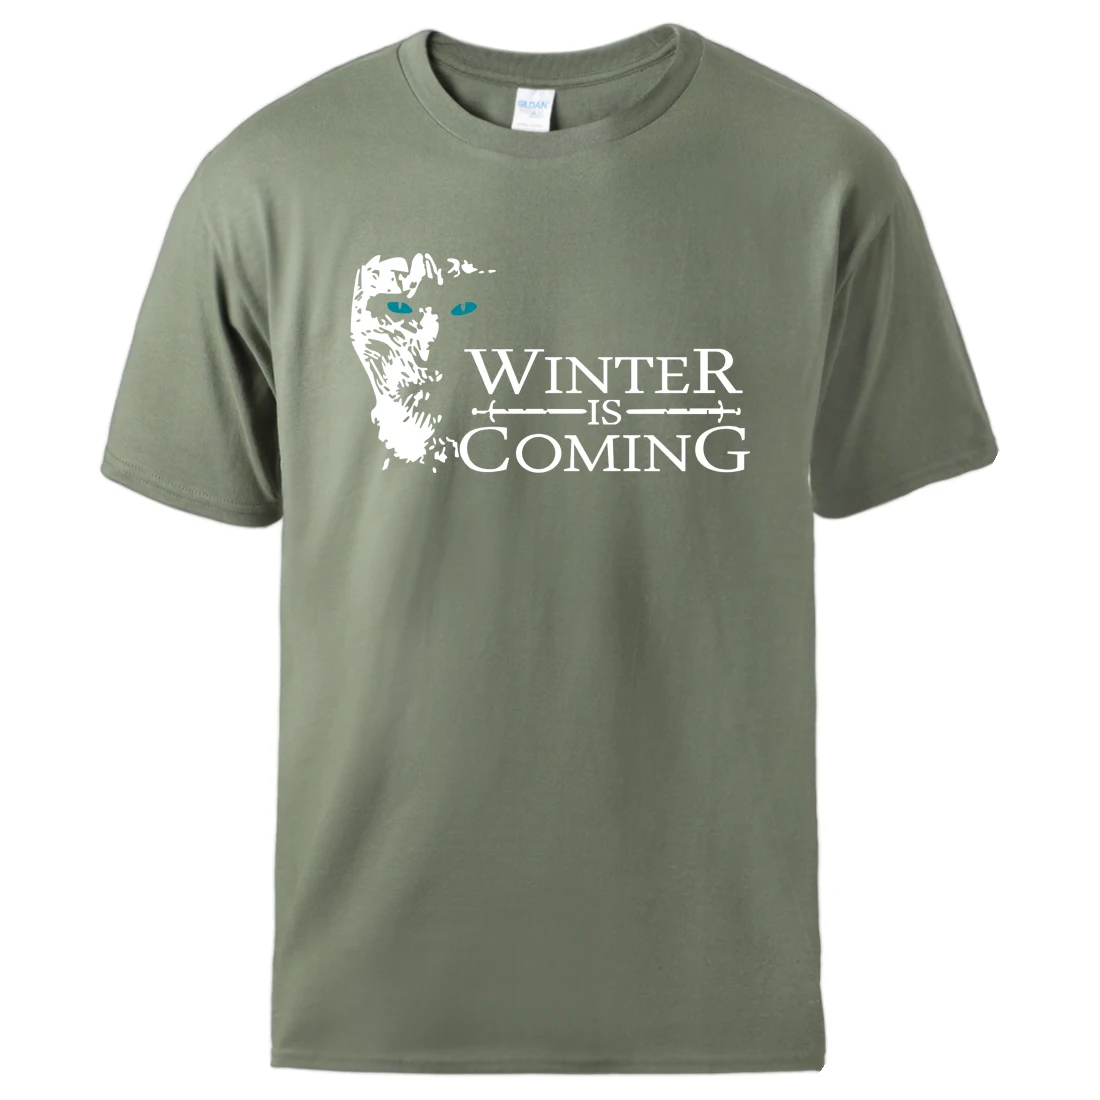 Tshirts Game Of Thrones House Of Stark Winter is Coming Mens Summer Tee 2020 Casual Sportswear Cool Short Sleeve Tracksuits Tee